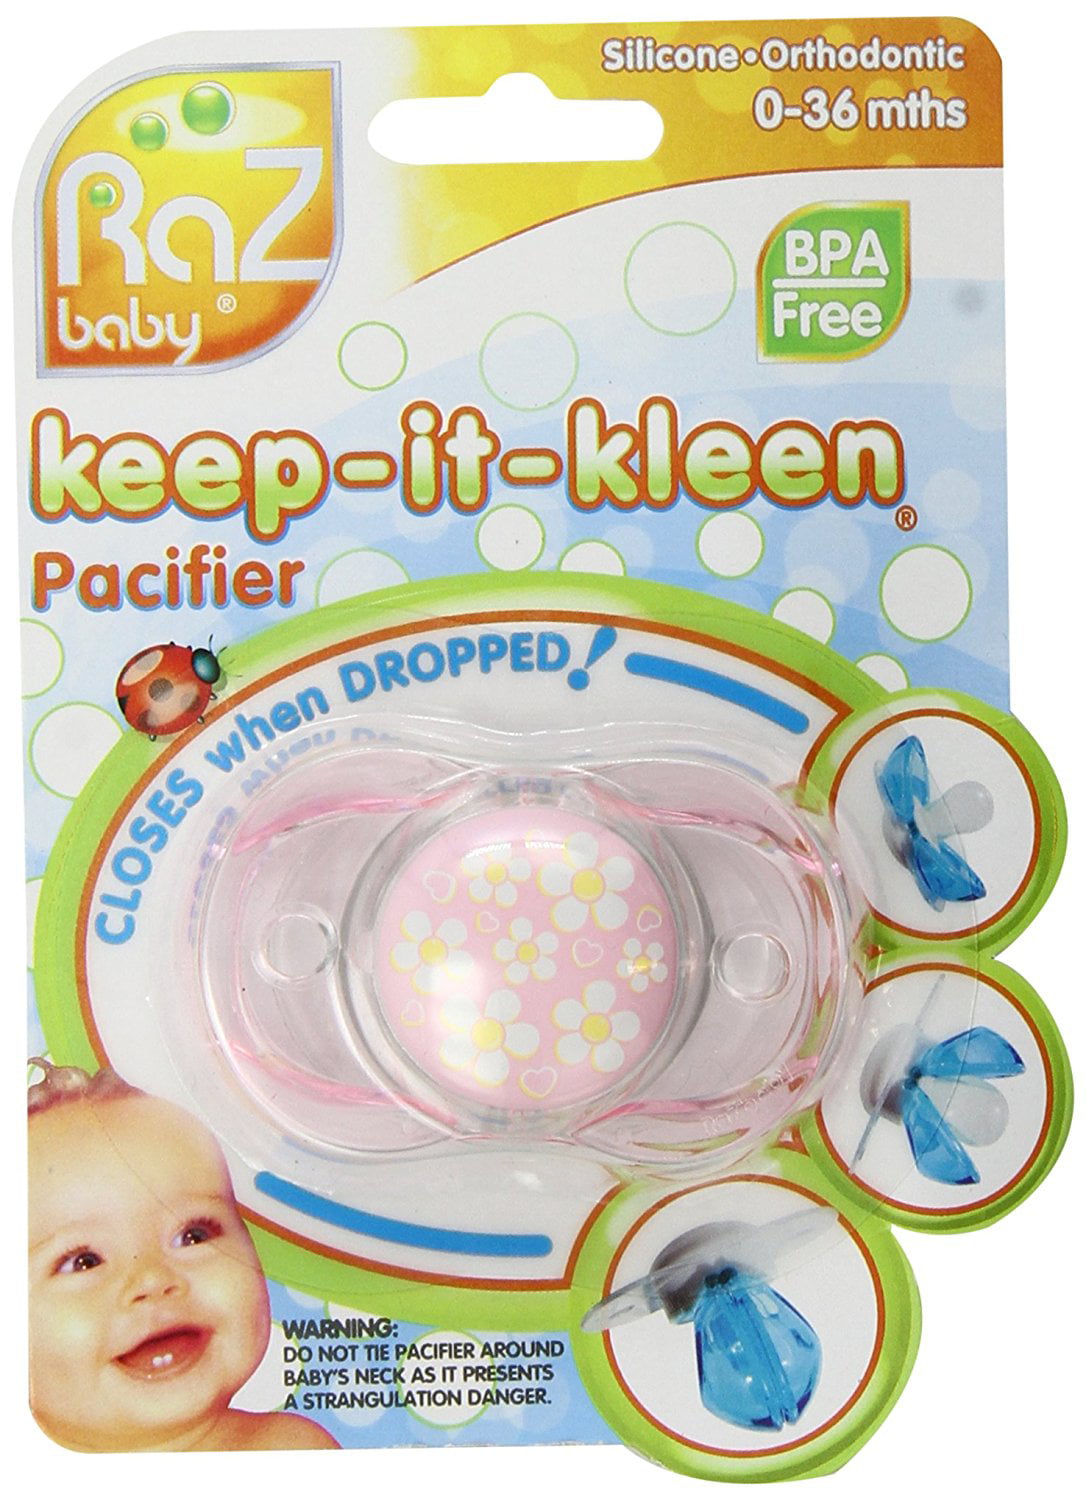 Newborn Baby Pacifier BPA Free Automatic Closing Soother Nipple with Covers 